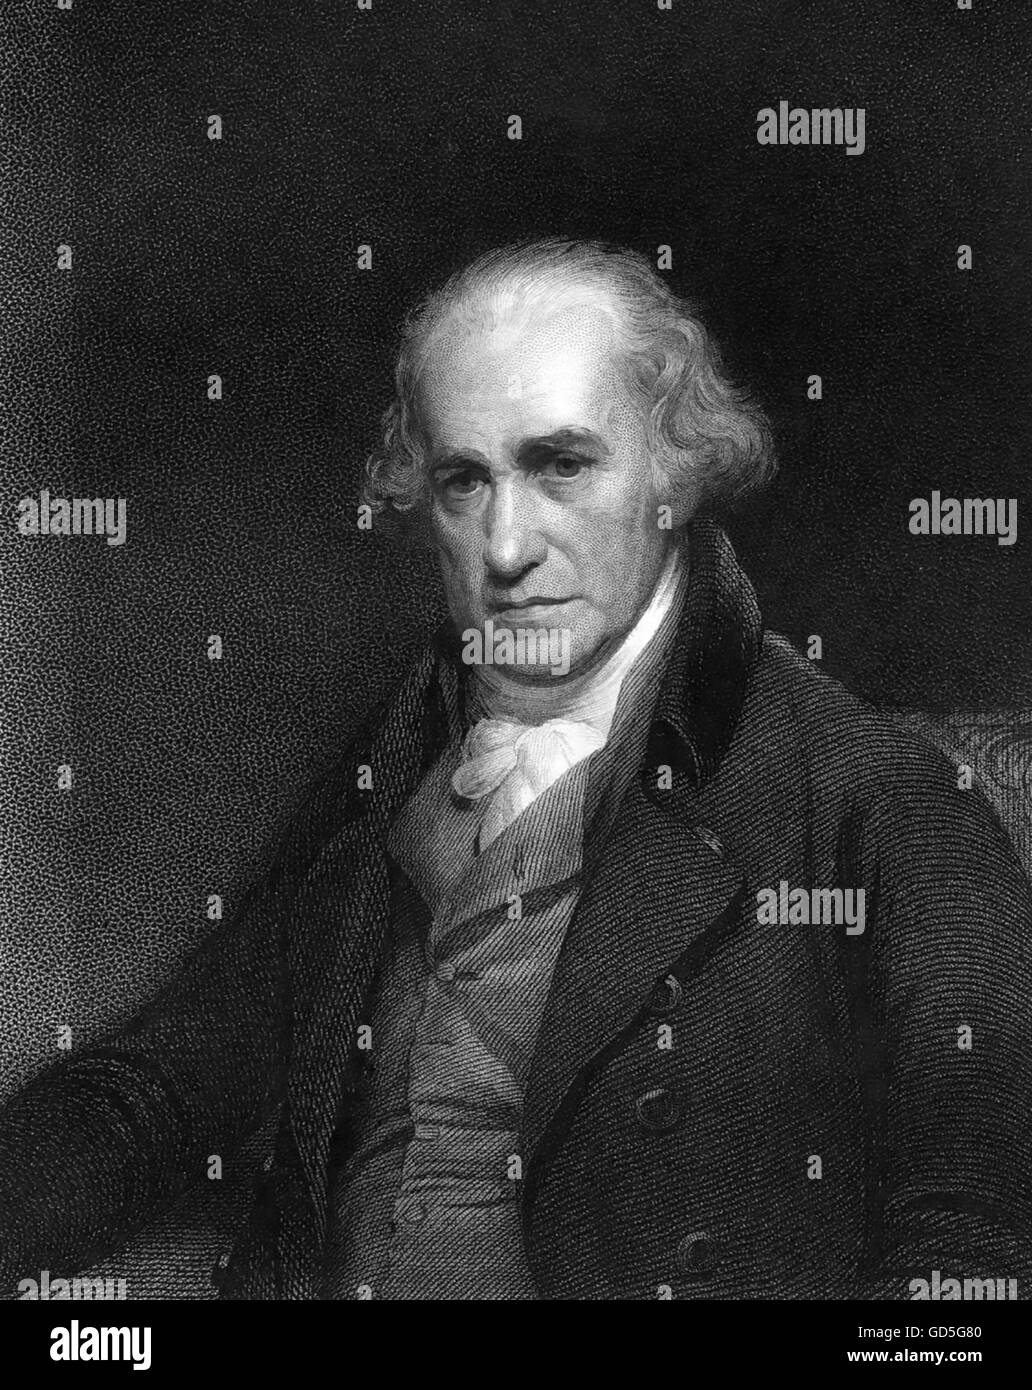 JAMES WATT (1736-1819) Scottish mechanical engineer and inventor. Steel engraving based on 1806 painting by William Beechey Stock Photo